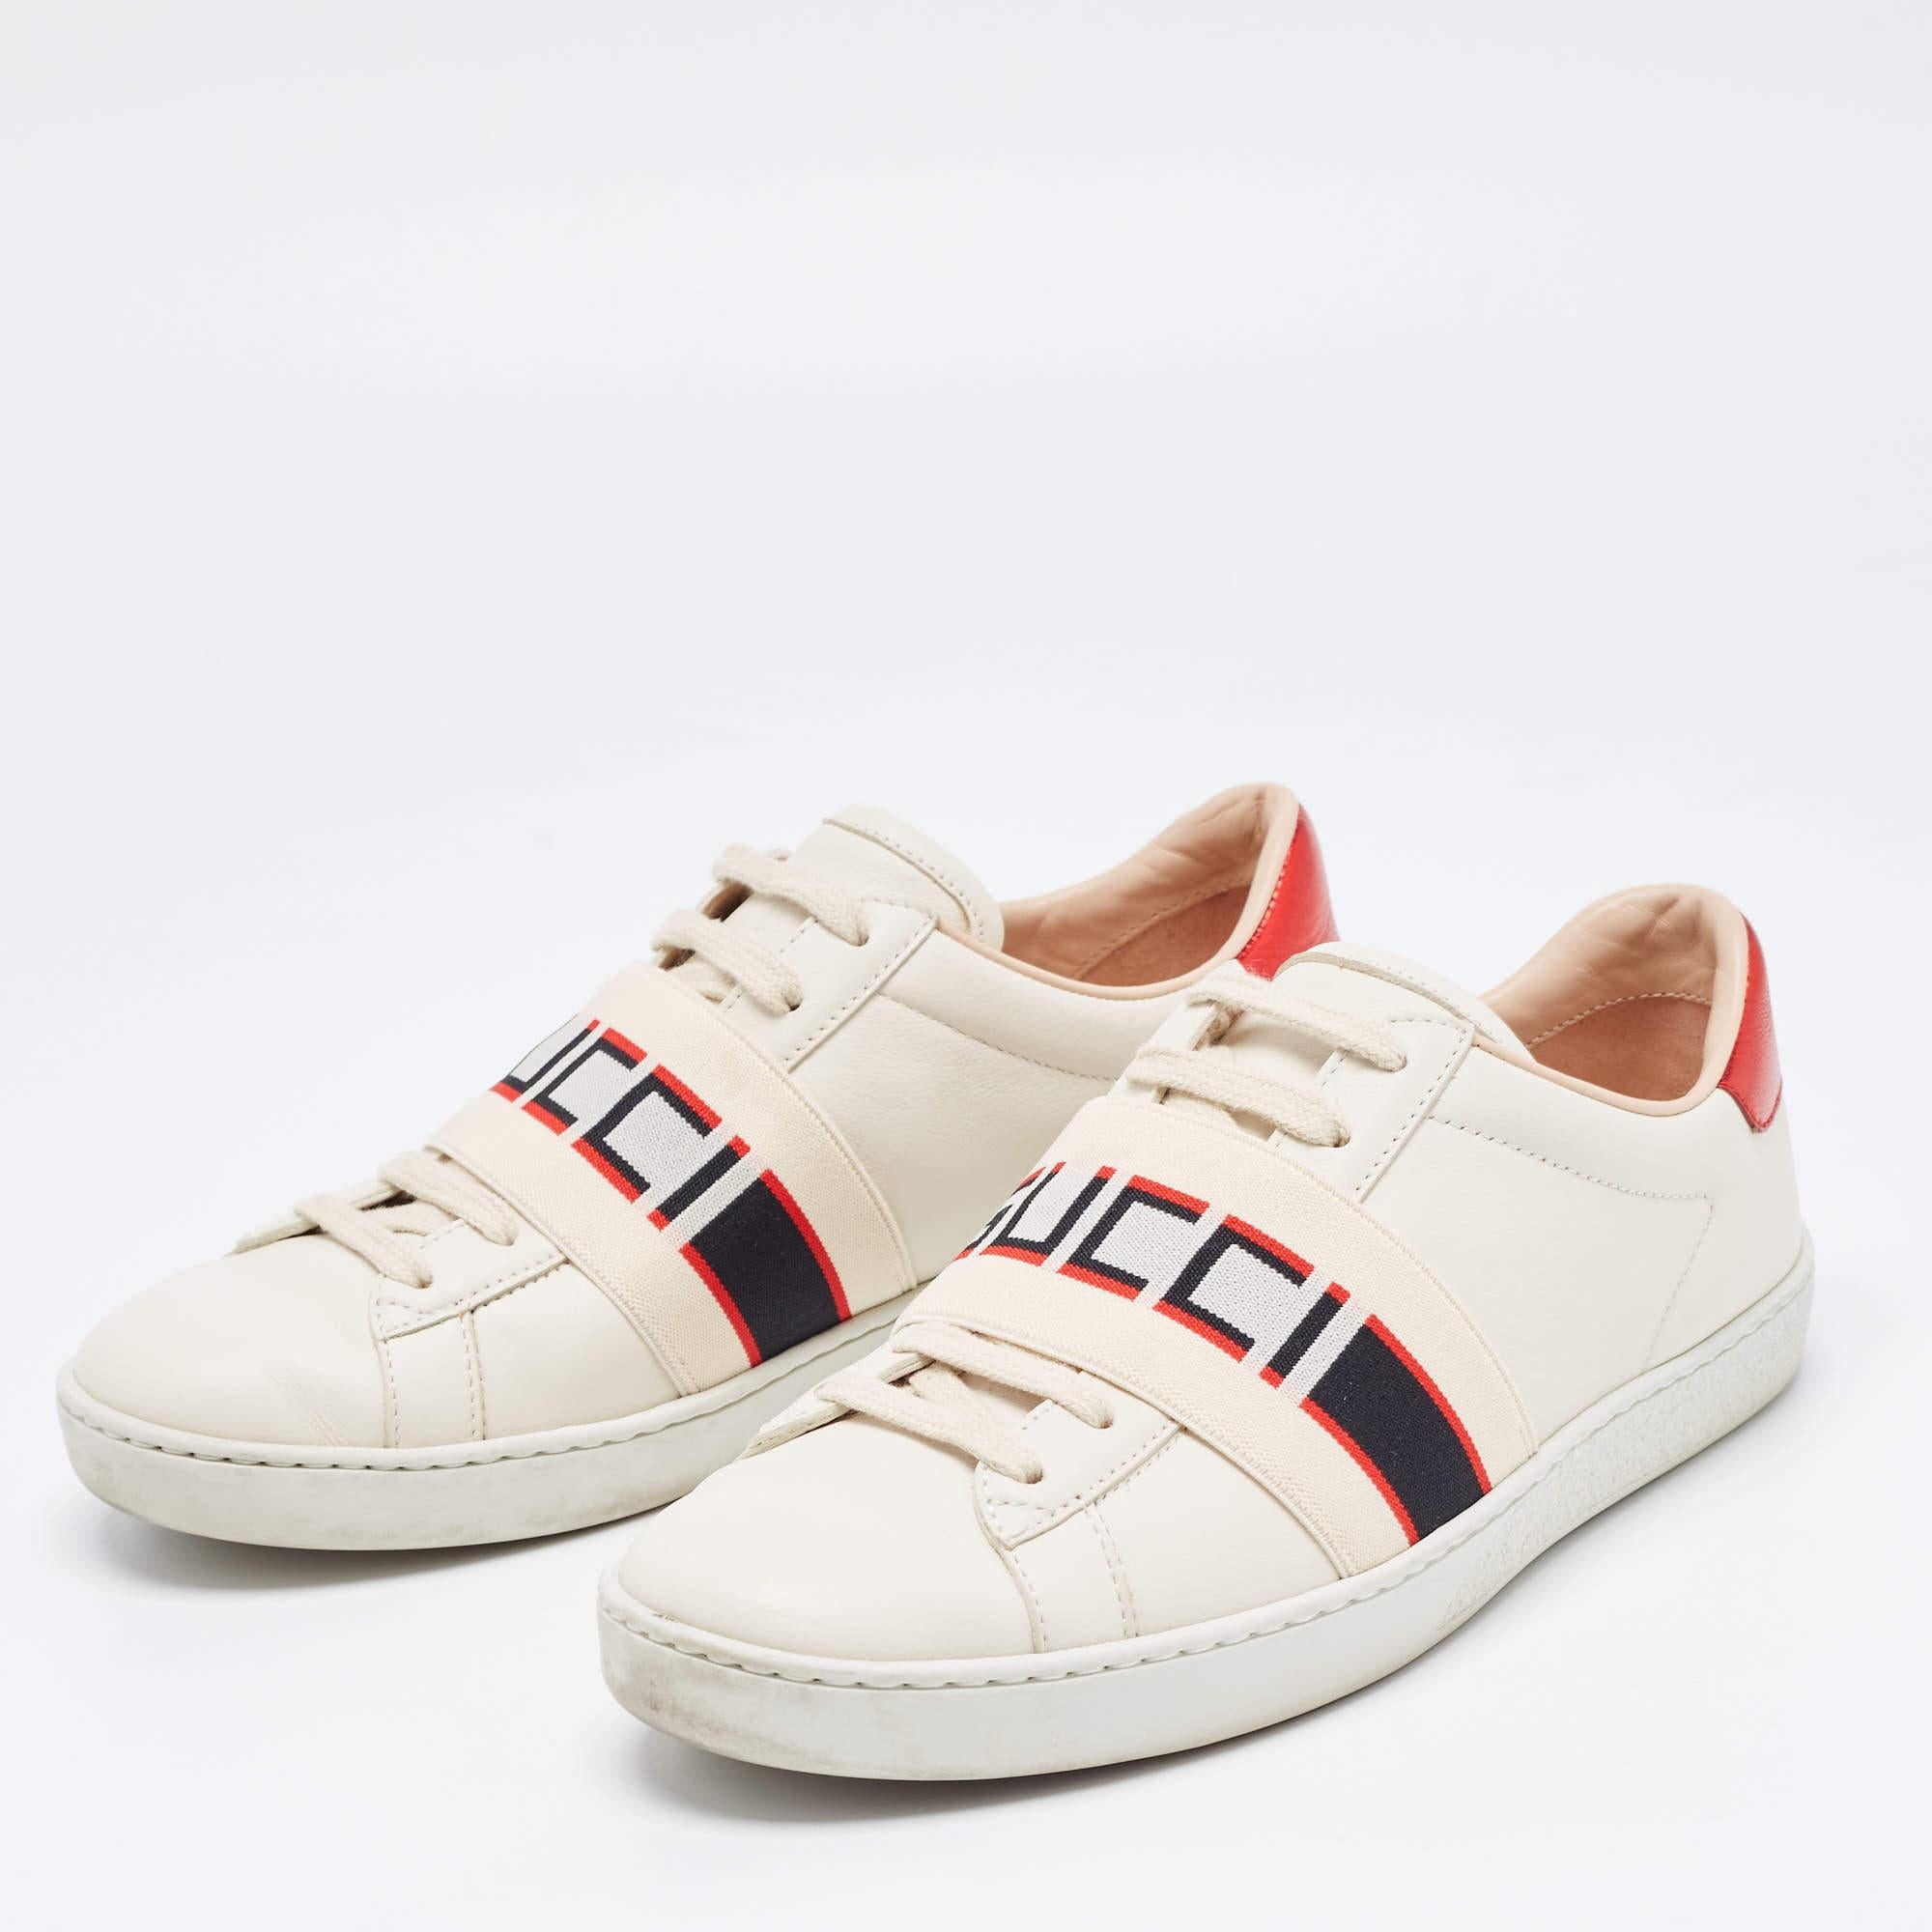 Beige Gucci Cream/Red Leather Ace Gucci Band Low Top Sneakers Size 37